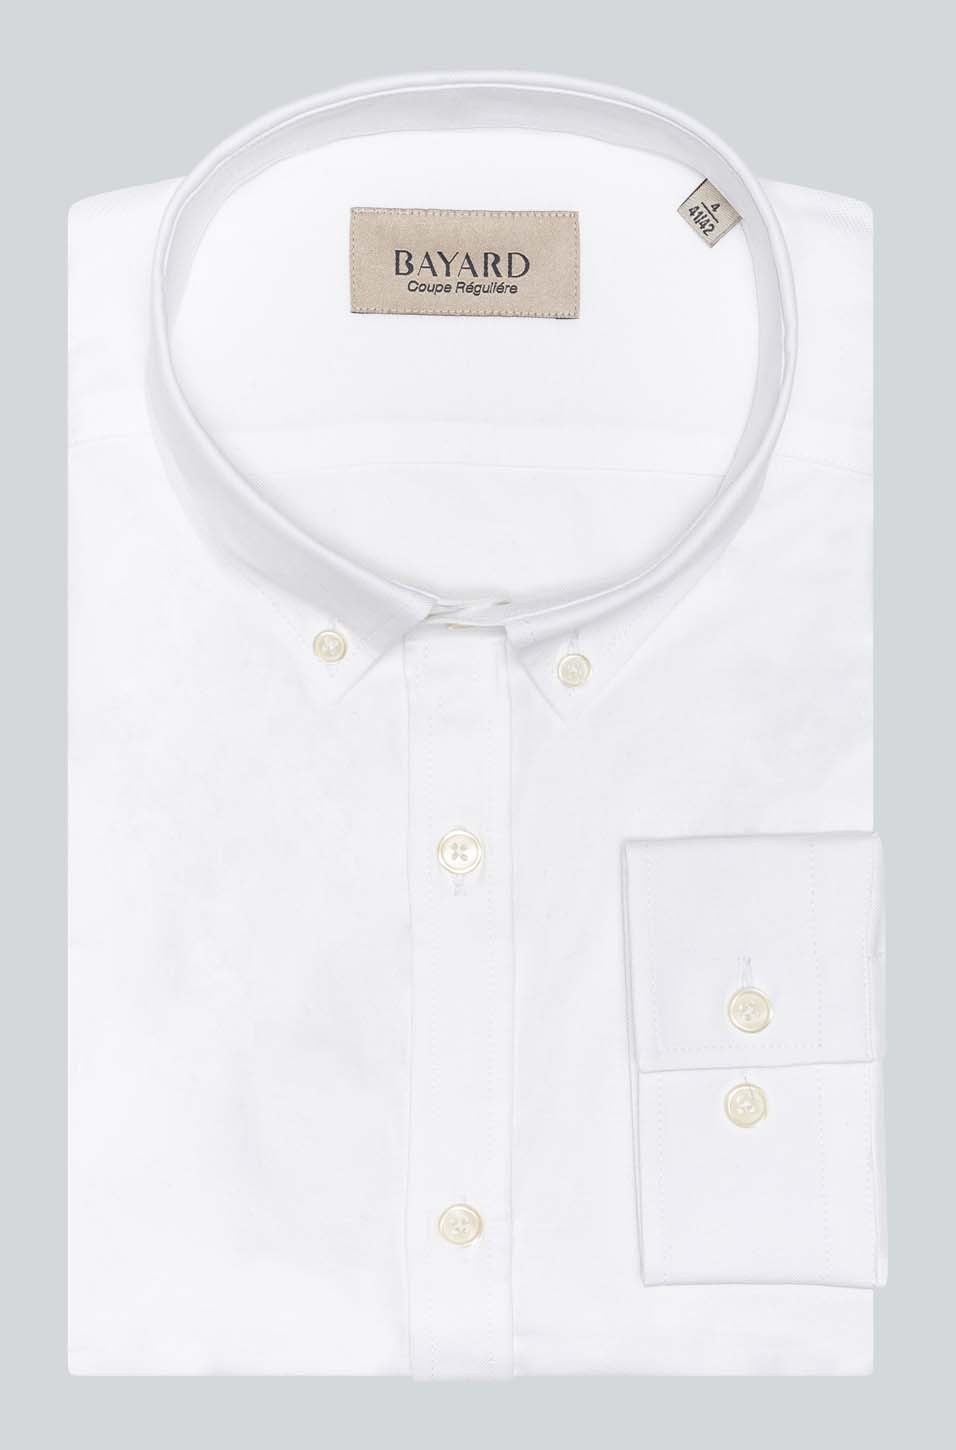 Chemise blanche Oxford